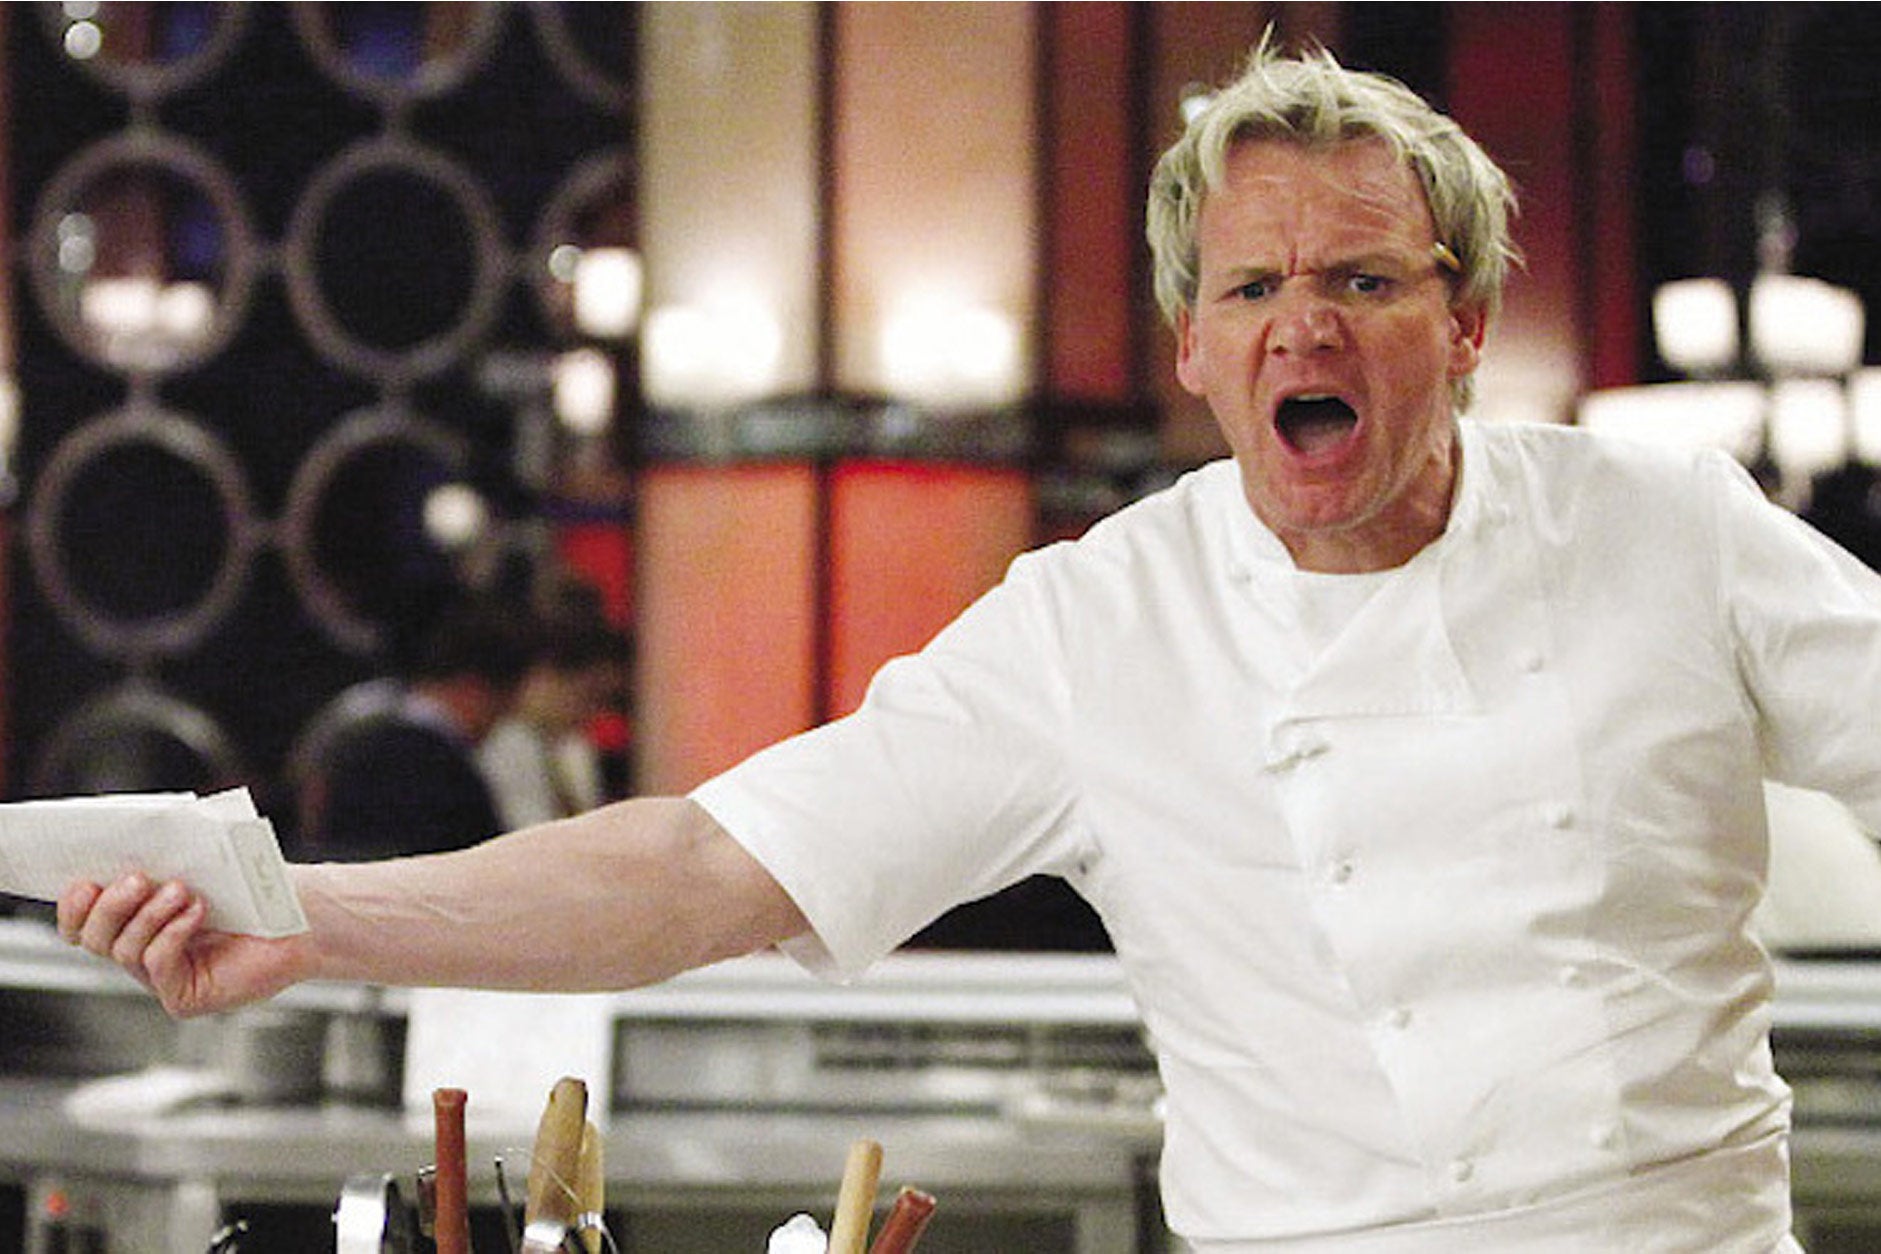 Gordon Ramsay yelling while holding restaurant tickets, in a still from one of his reality TV shows.